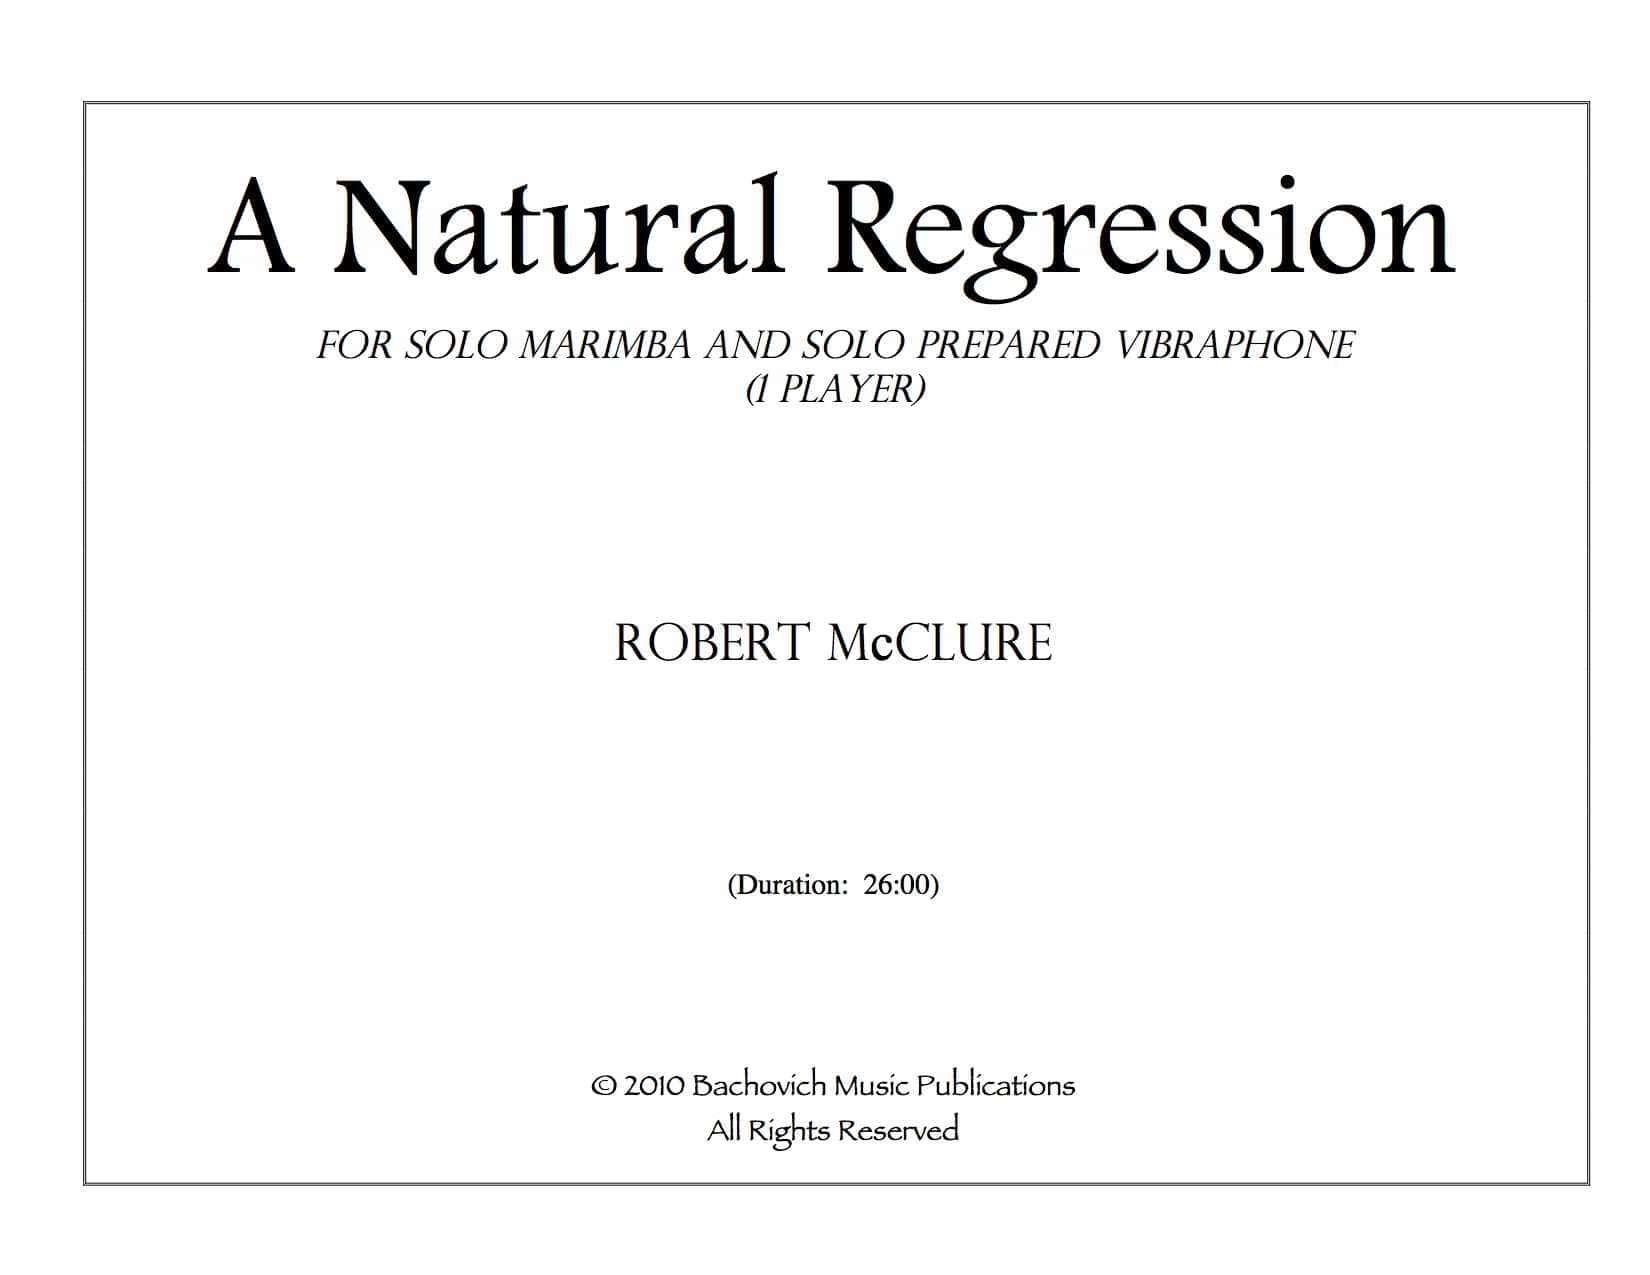 A Natural Regression for solo marimba and solo prepared vibraphone (1 player) by Robert McClure